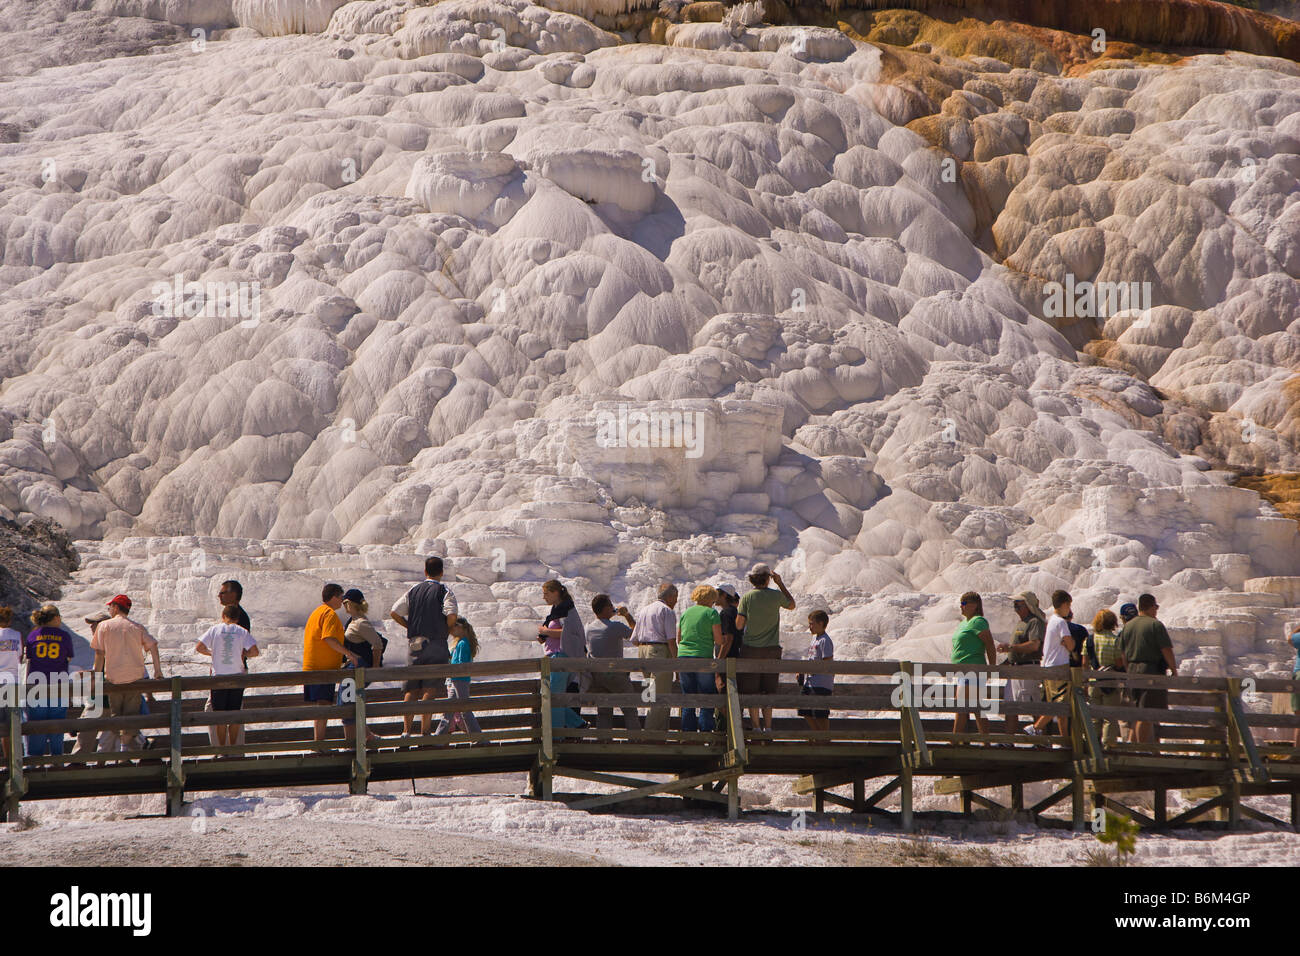 YELLOWSTONE NATIONAL PARK, WYOMING, USA - Tourists on boardwalk at Palette Spring area of the Mammoth Hot Springs Terraces Stock Photo